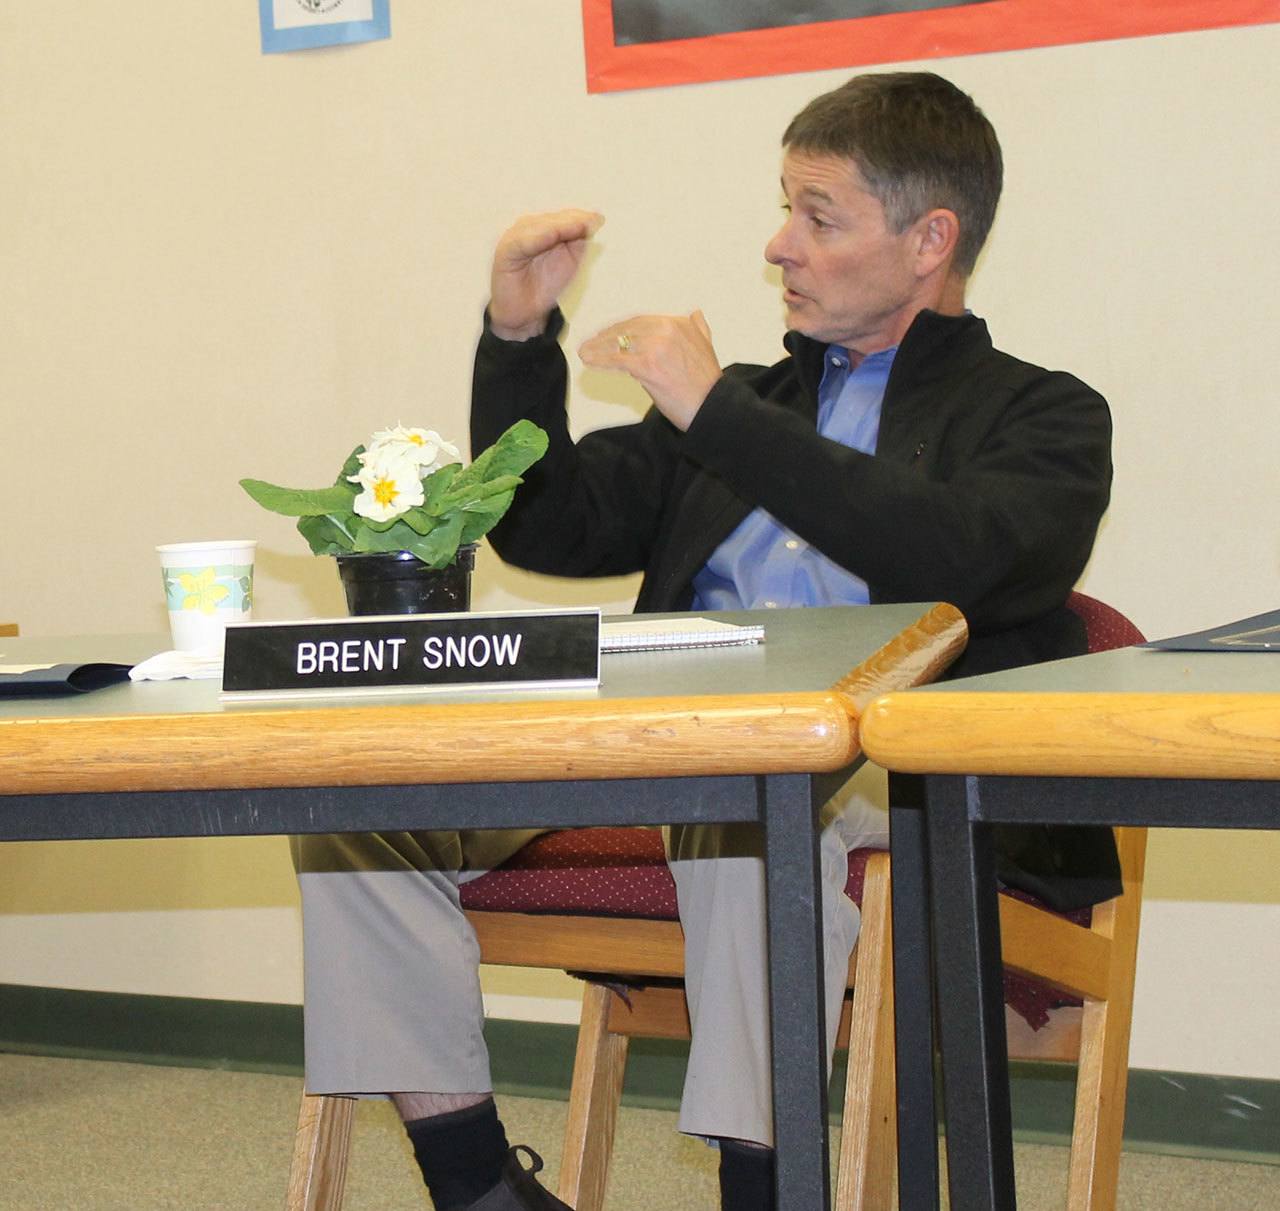 Staff photo/Hayley Day                                Brent Snow, San Juan Island School District board member, discusses whether the sixth grade should move at the Jan. 25 meeting.